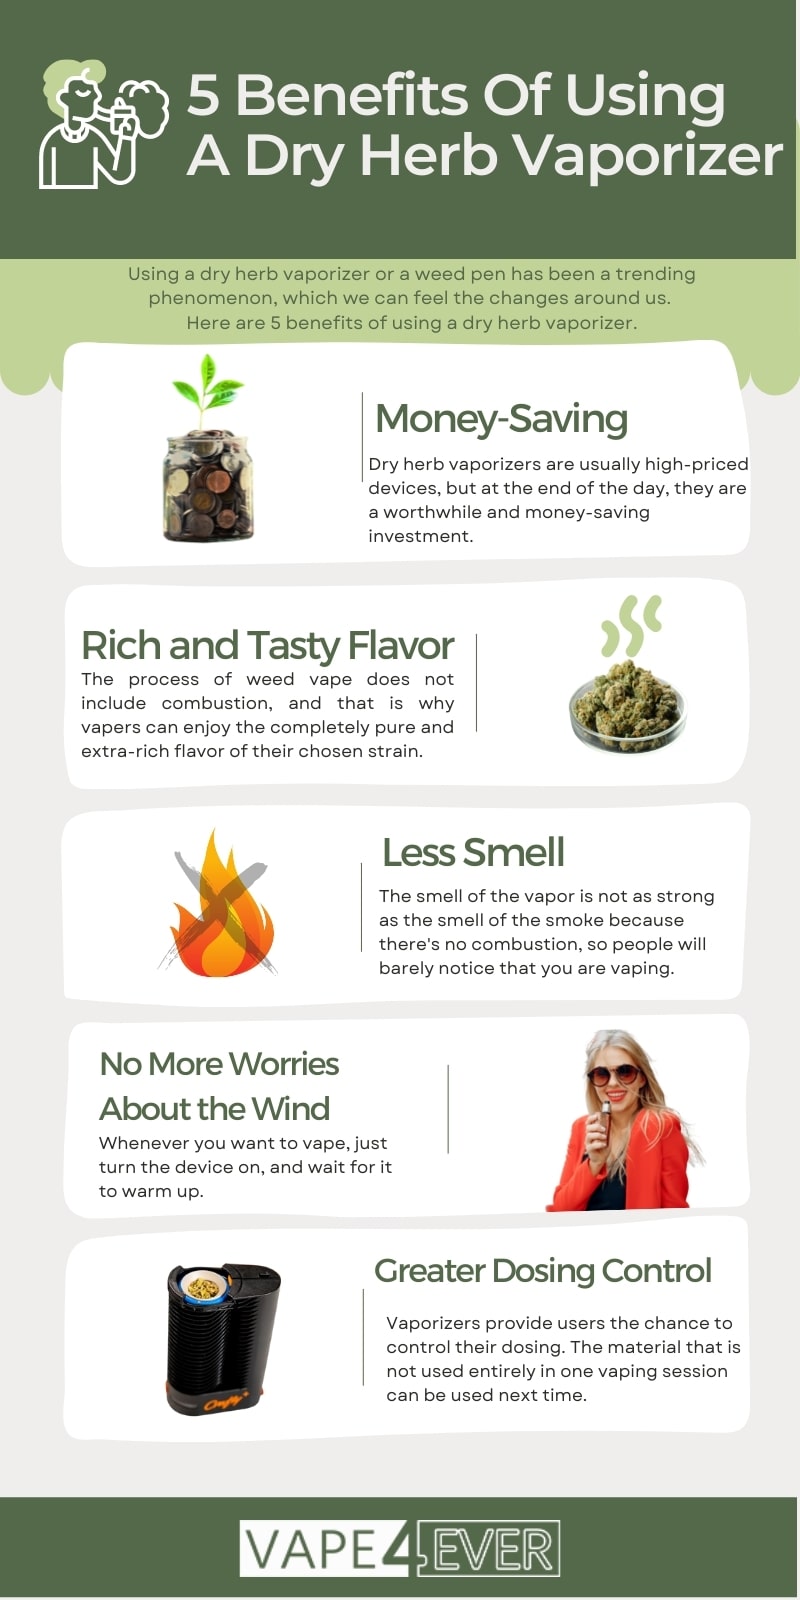 What Are the Benefits of Using a Dry Herb Vaporizer